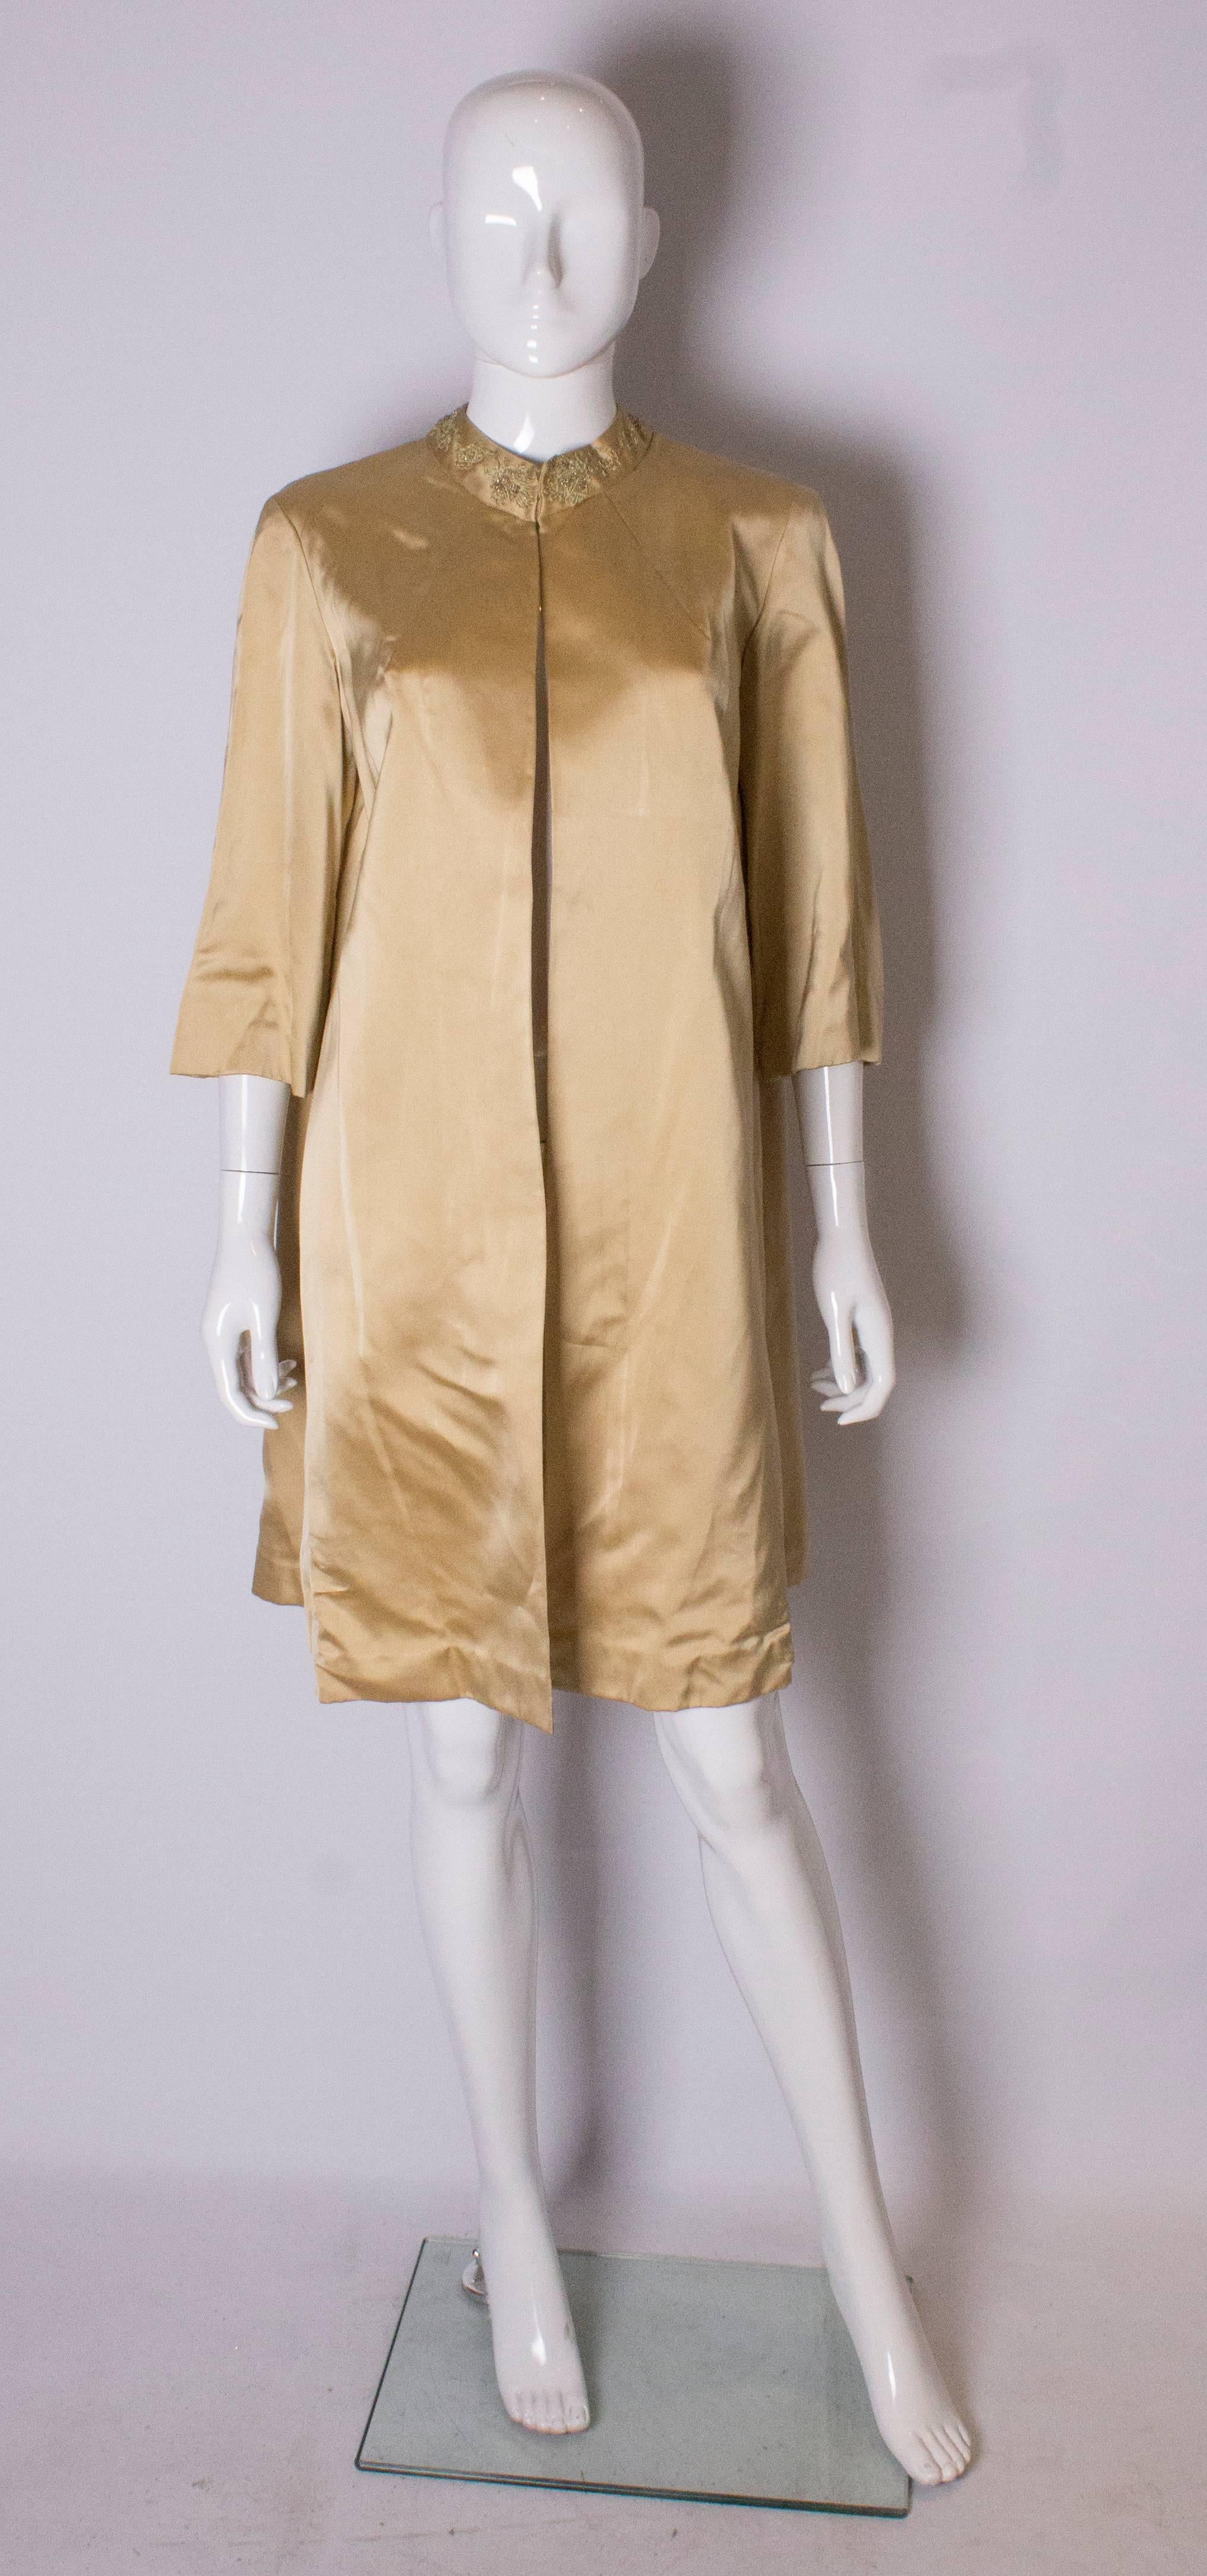 A great vintage duster coat for Spring /Summer. This gold satin  coat has an embroidered collar, is loose fitting , and can fit a bust up to 42''